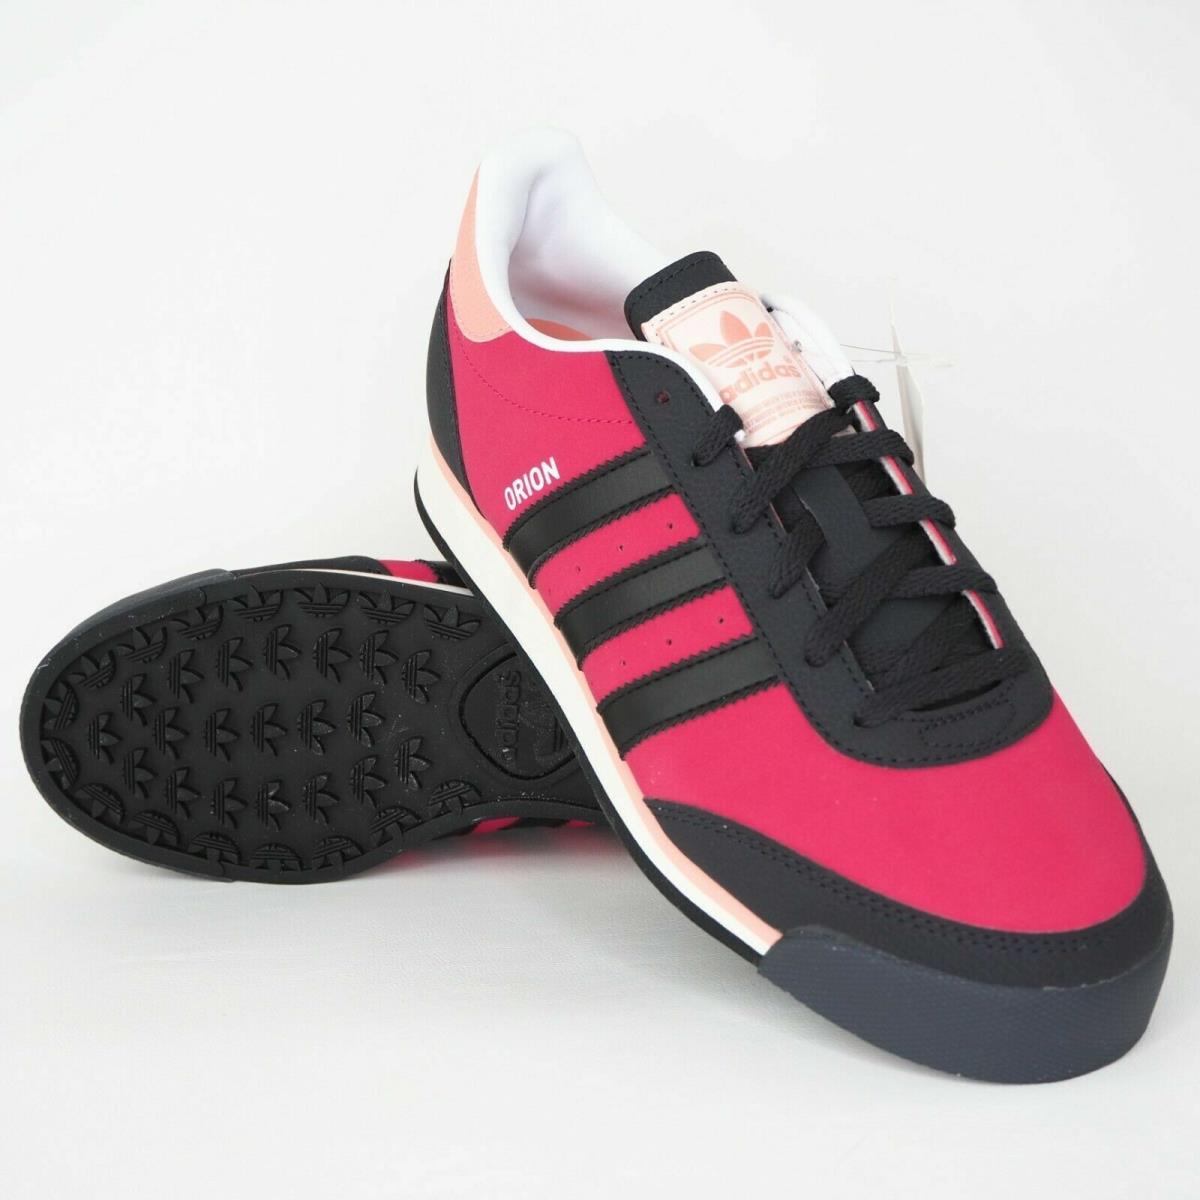 Adidas shoes Orion - Pink 7